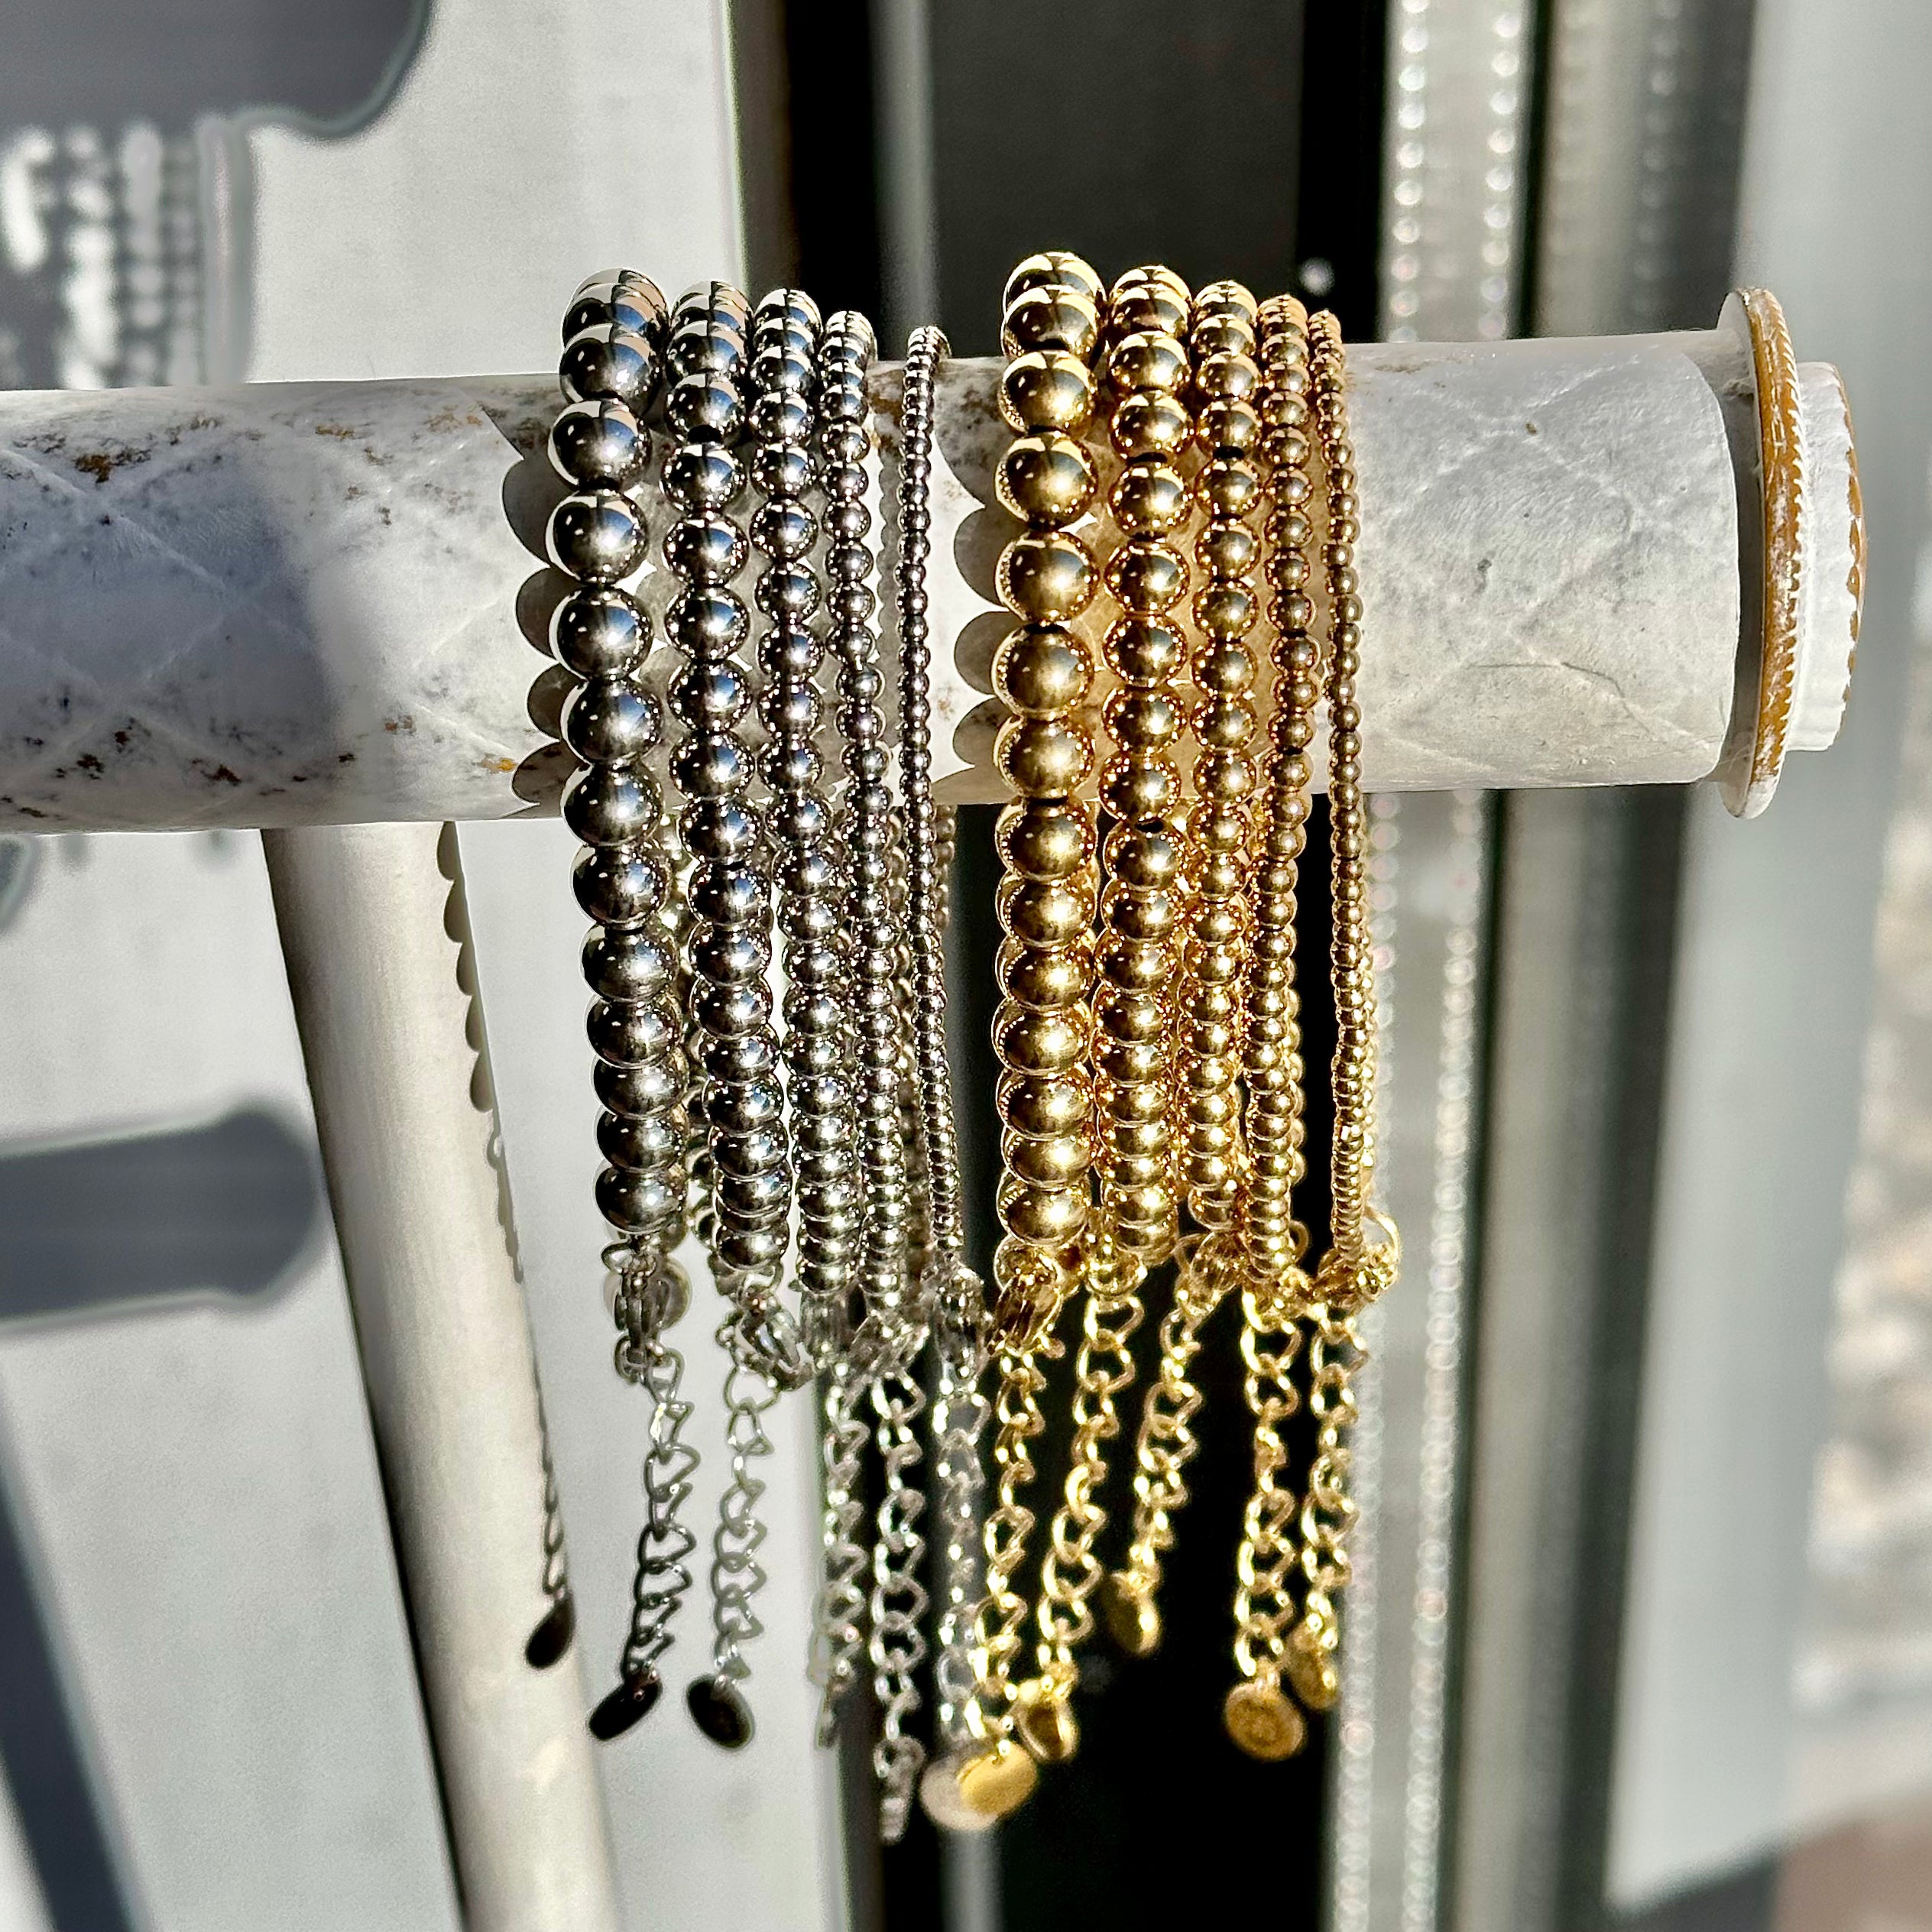 GOLD BALL BRACELETS - Stack or Individual